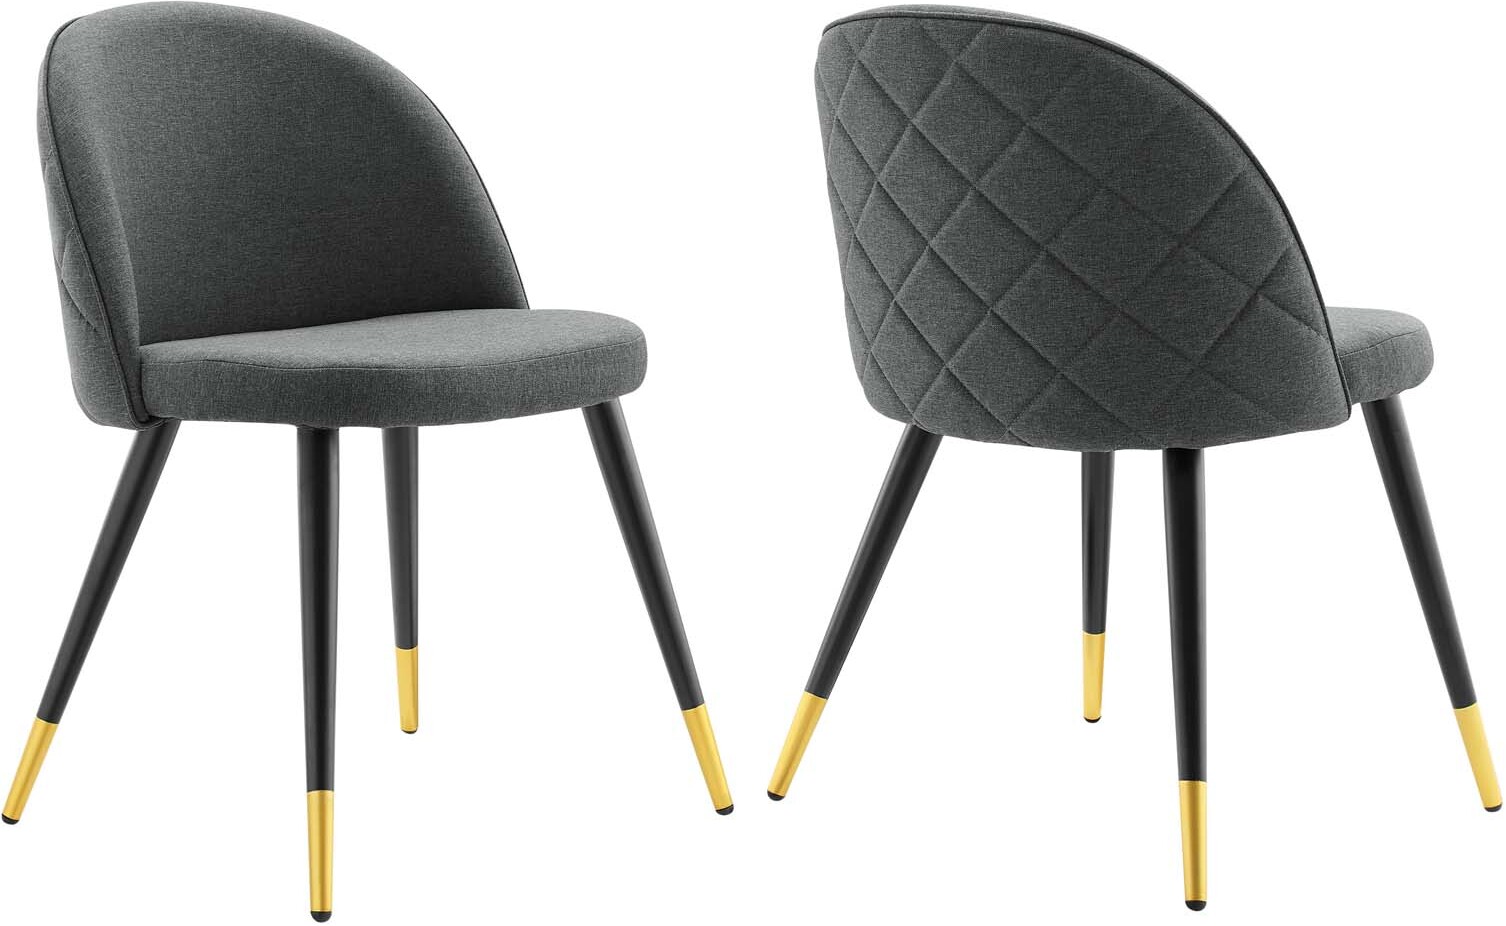 Cordial Upholstered Fabric Dining, Fabric Dining Chairs Set Of 2